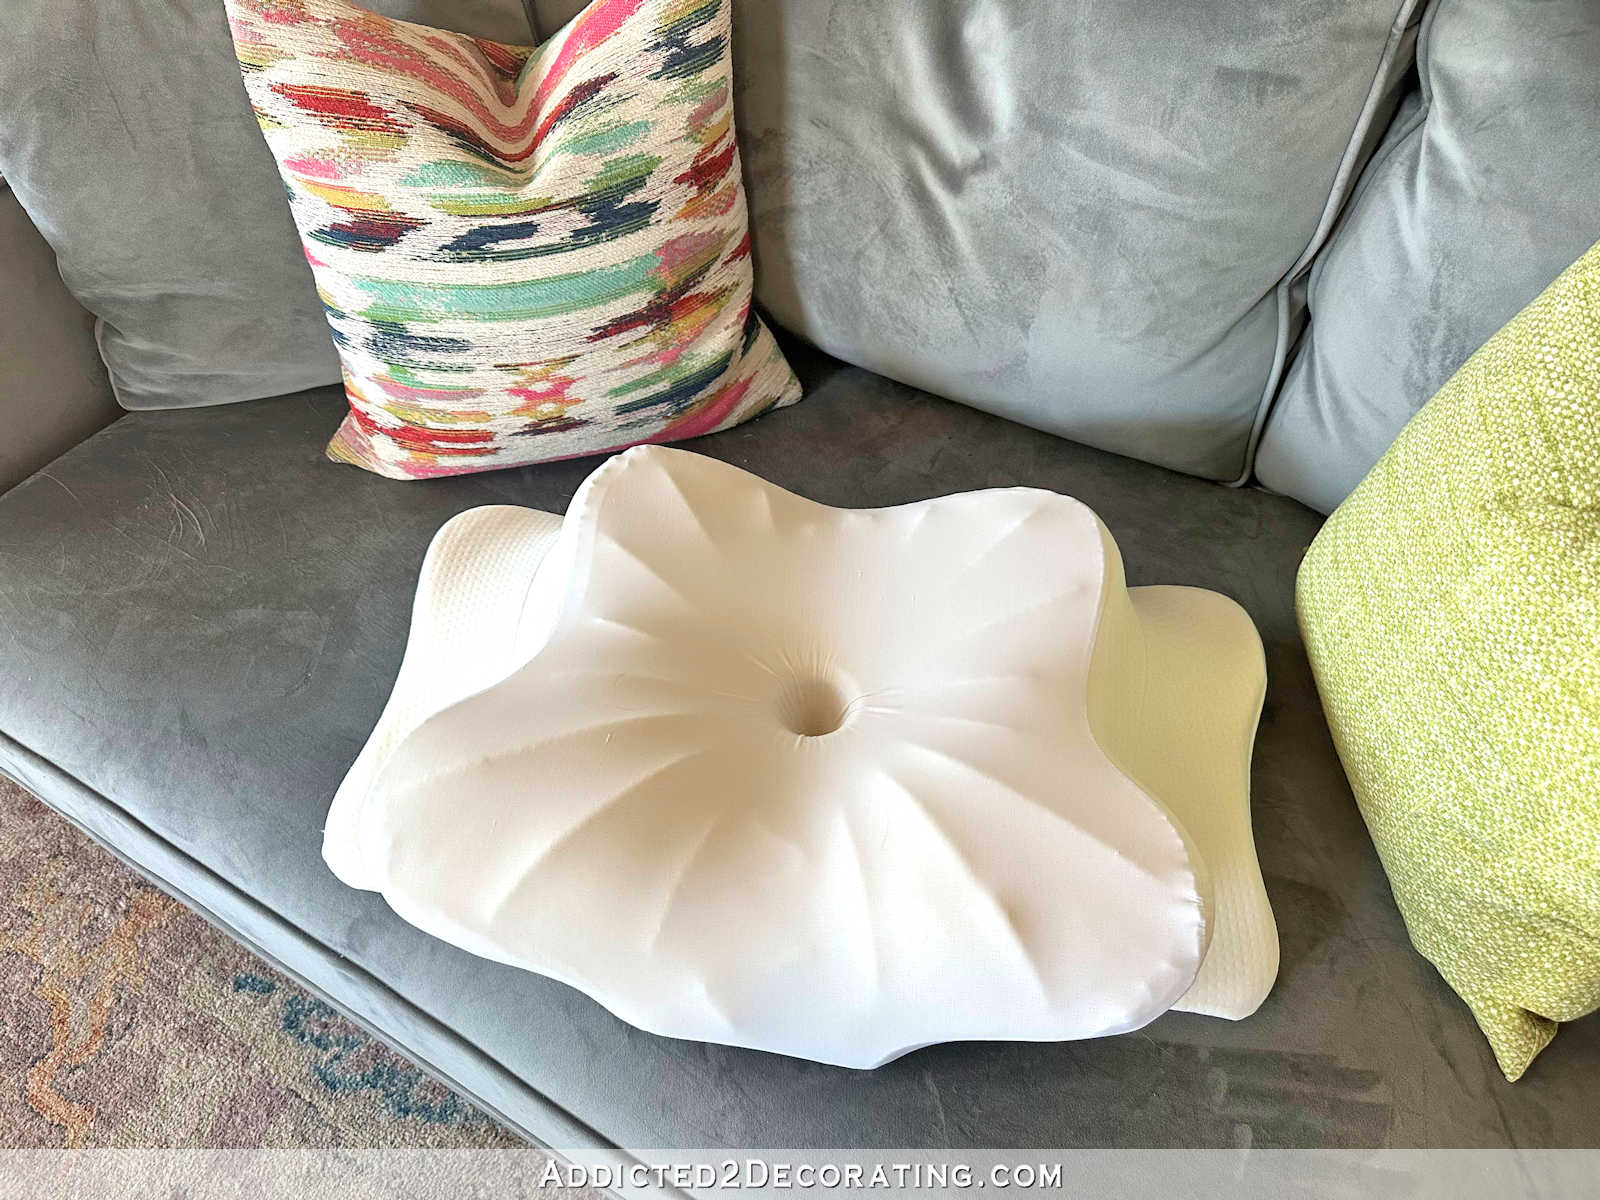 Putting Instagram Influencers’ Product Recommendations To The Test — DONAMA Memory Foam Cervical Pillow